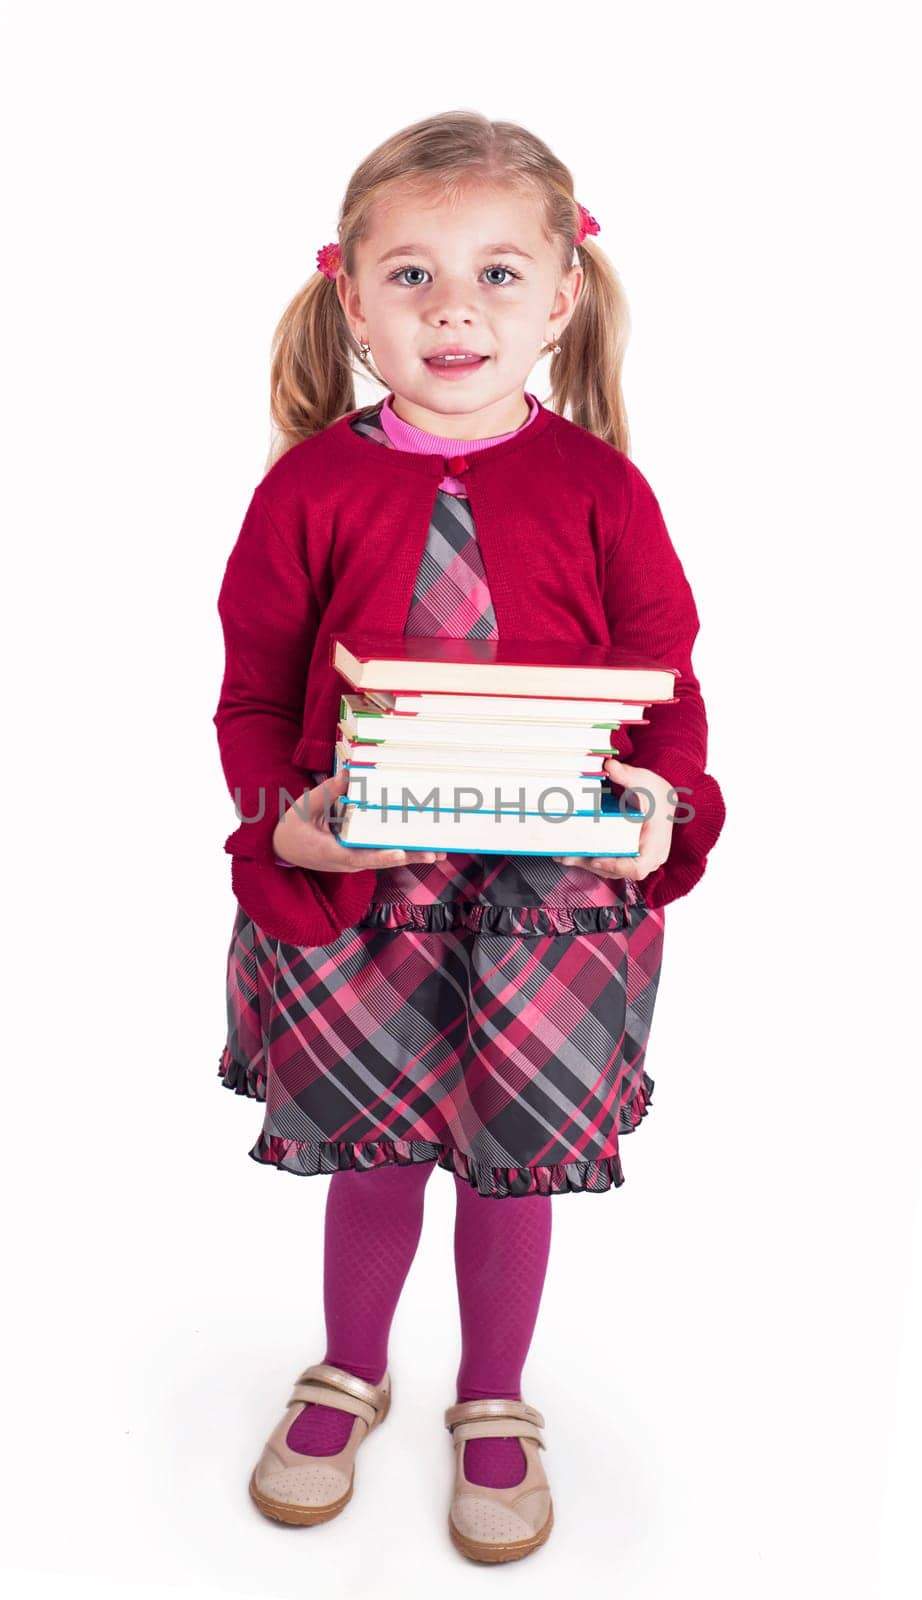 Education concept. An inquisitive child. Little girl with books getting ready to go back to school by aprilphoto